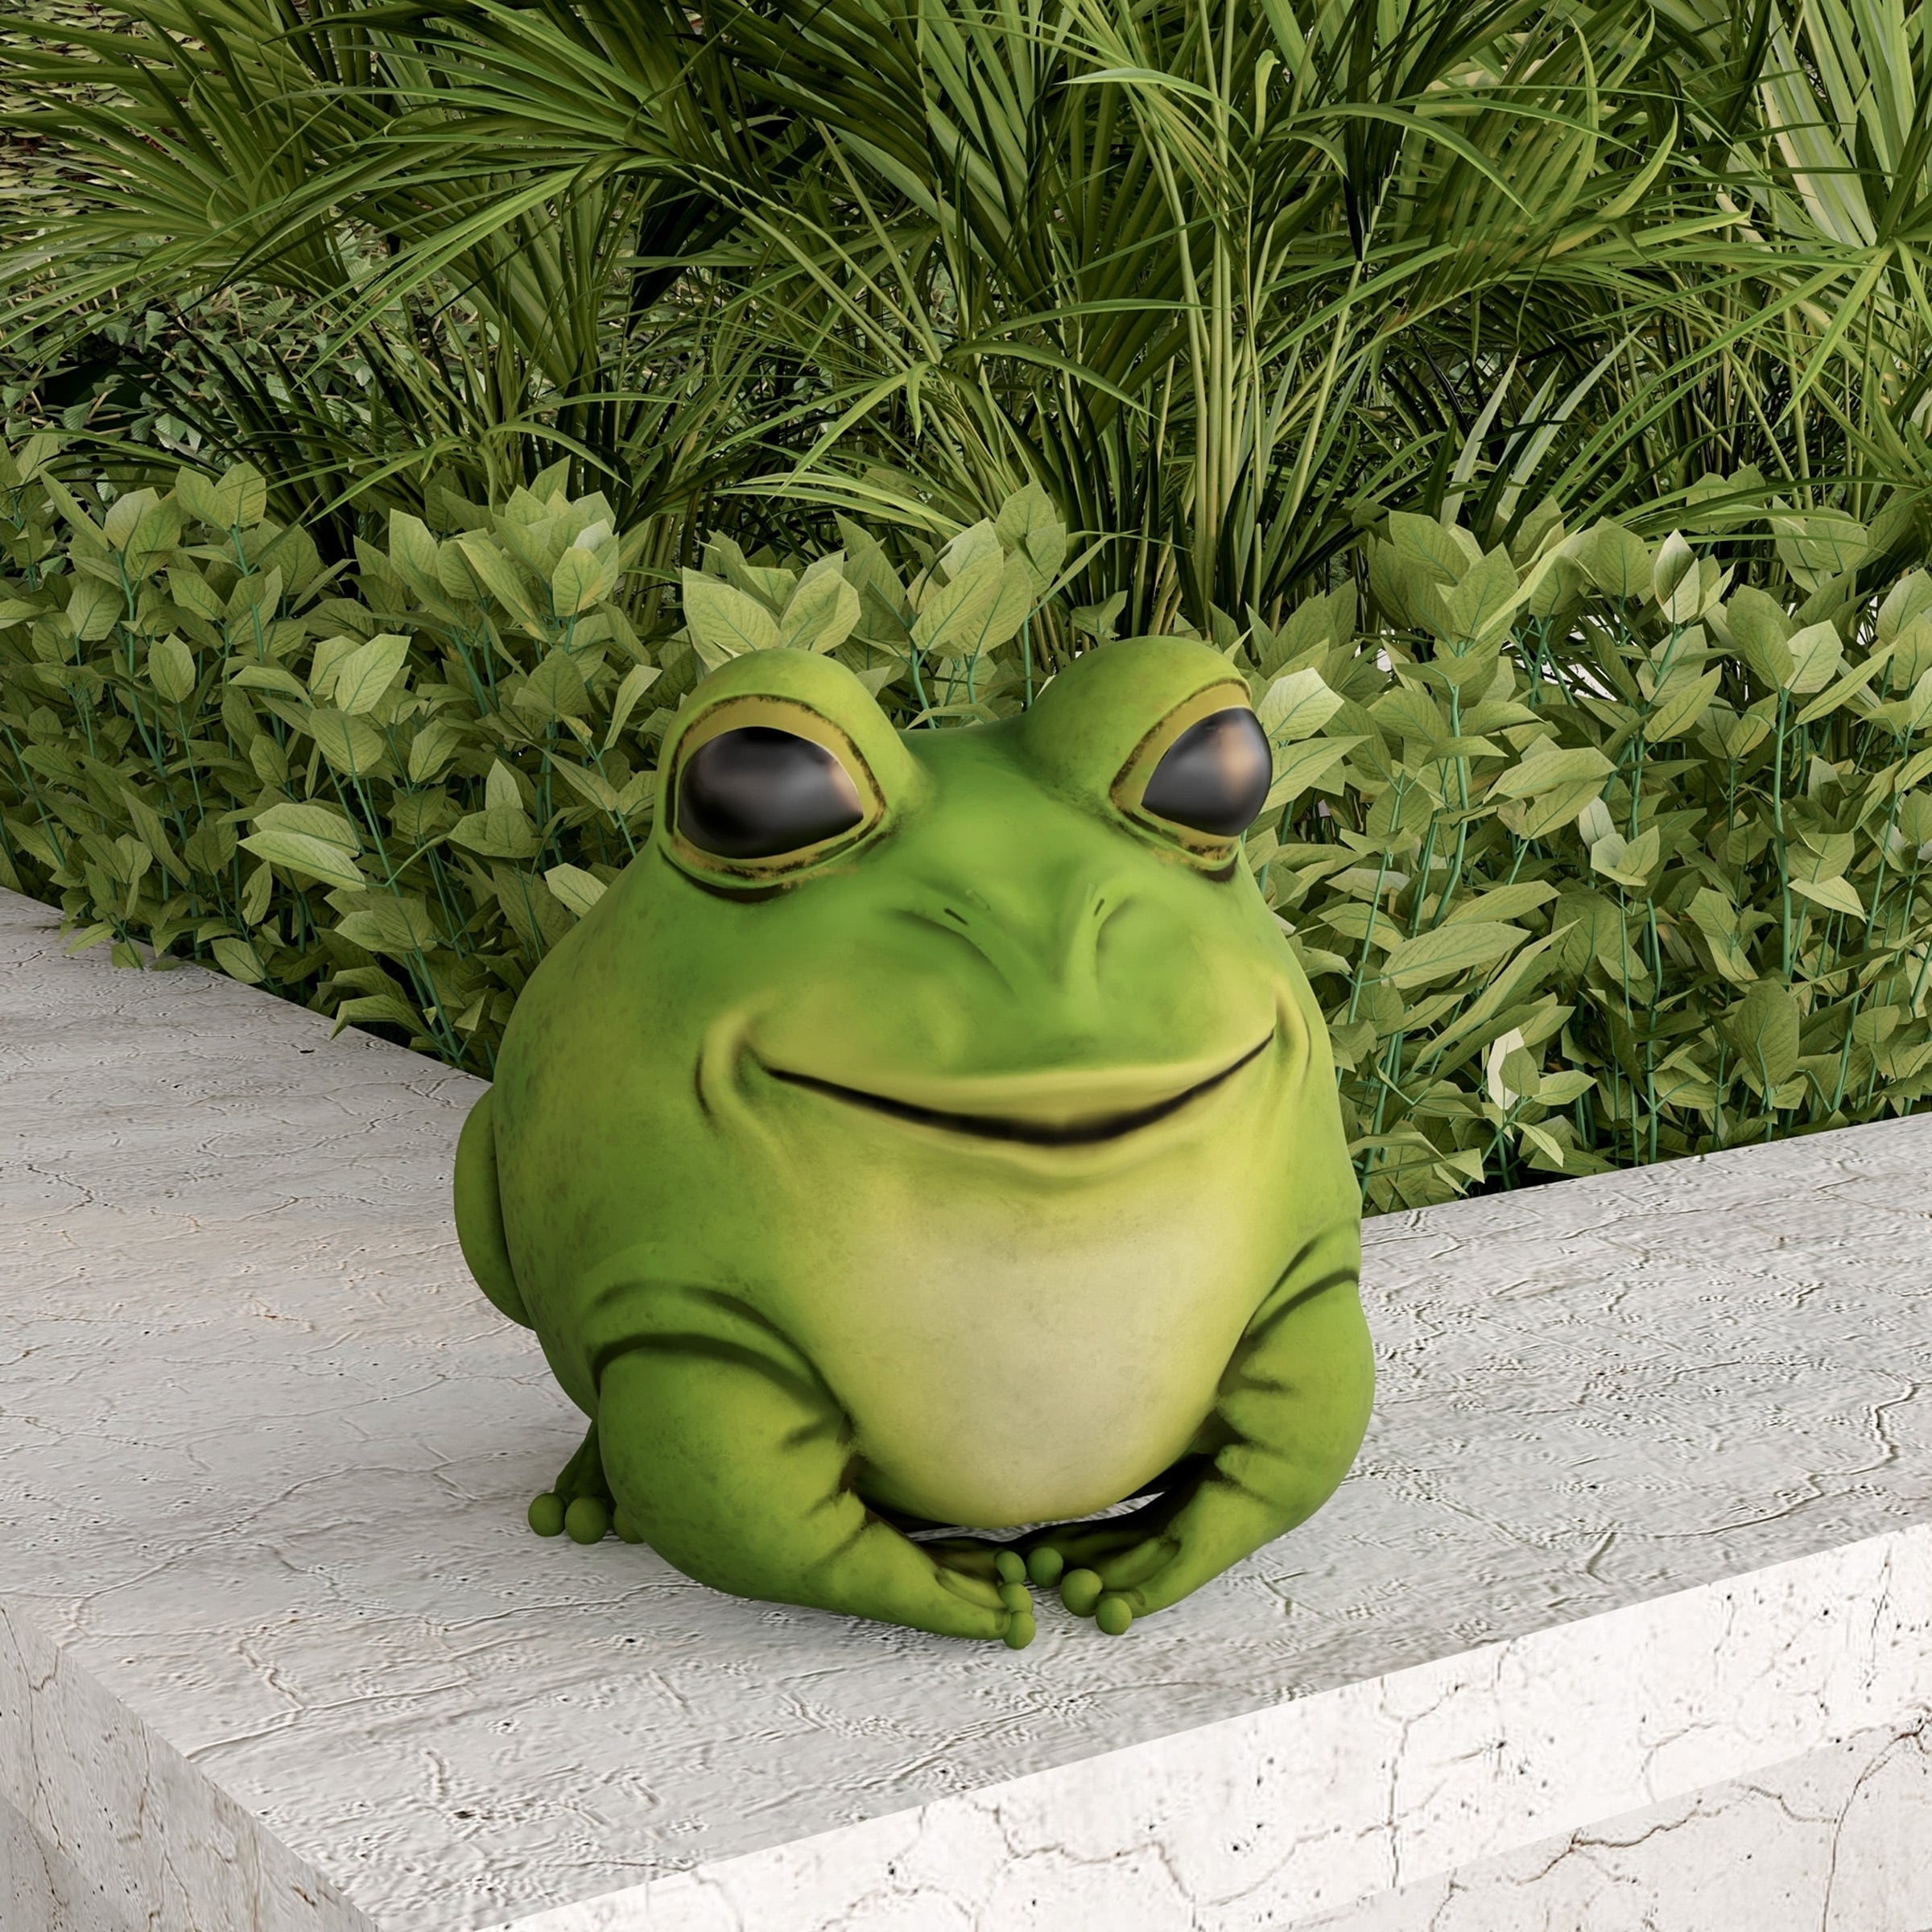 https://ak1.ostkcdn.com/images/products/25491414/Frog-Statue-Resin-Chubby-Animal-Figurine-by-Pure-Garden-03c1d228-331b-4404-a953-07fda085bcf5.jpg